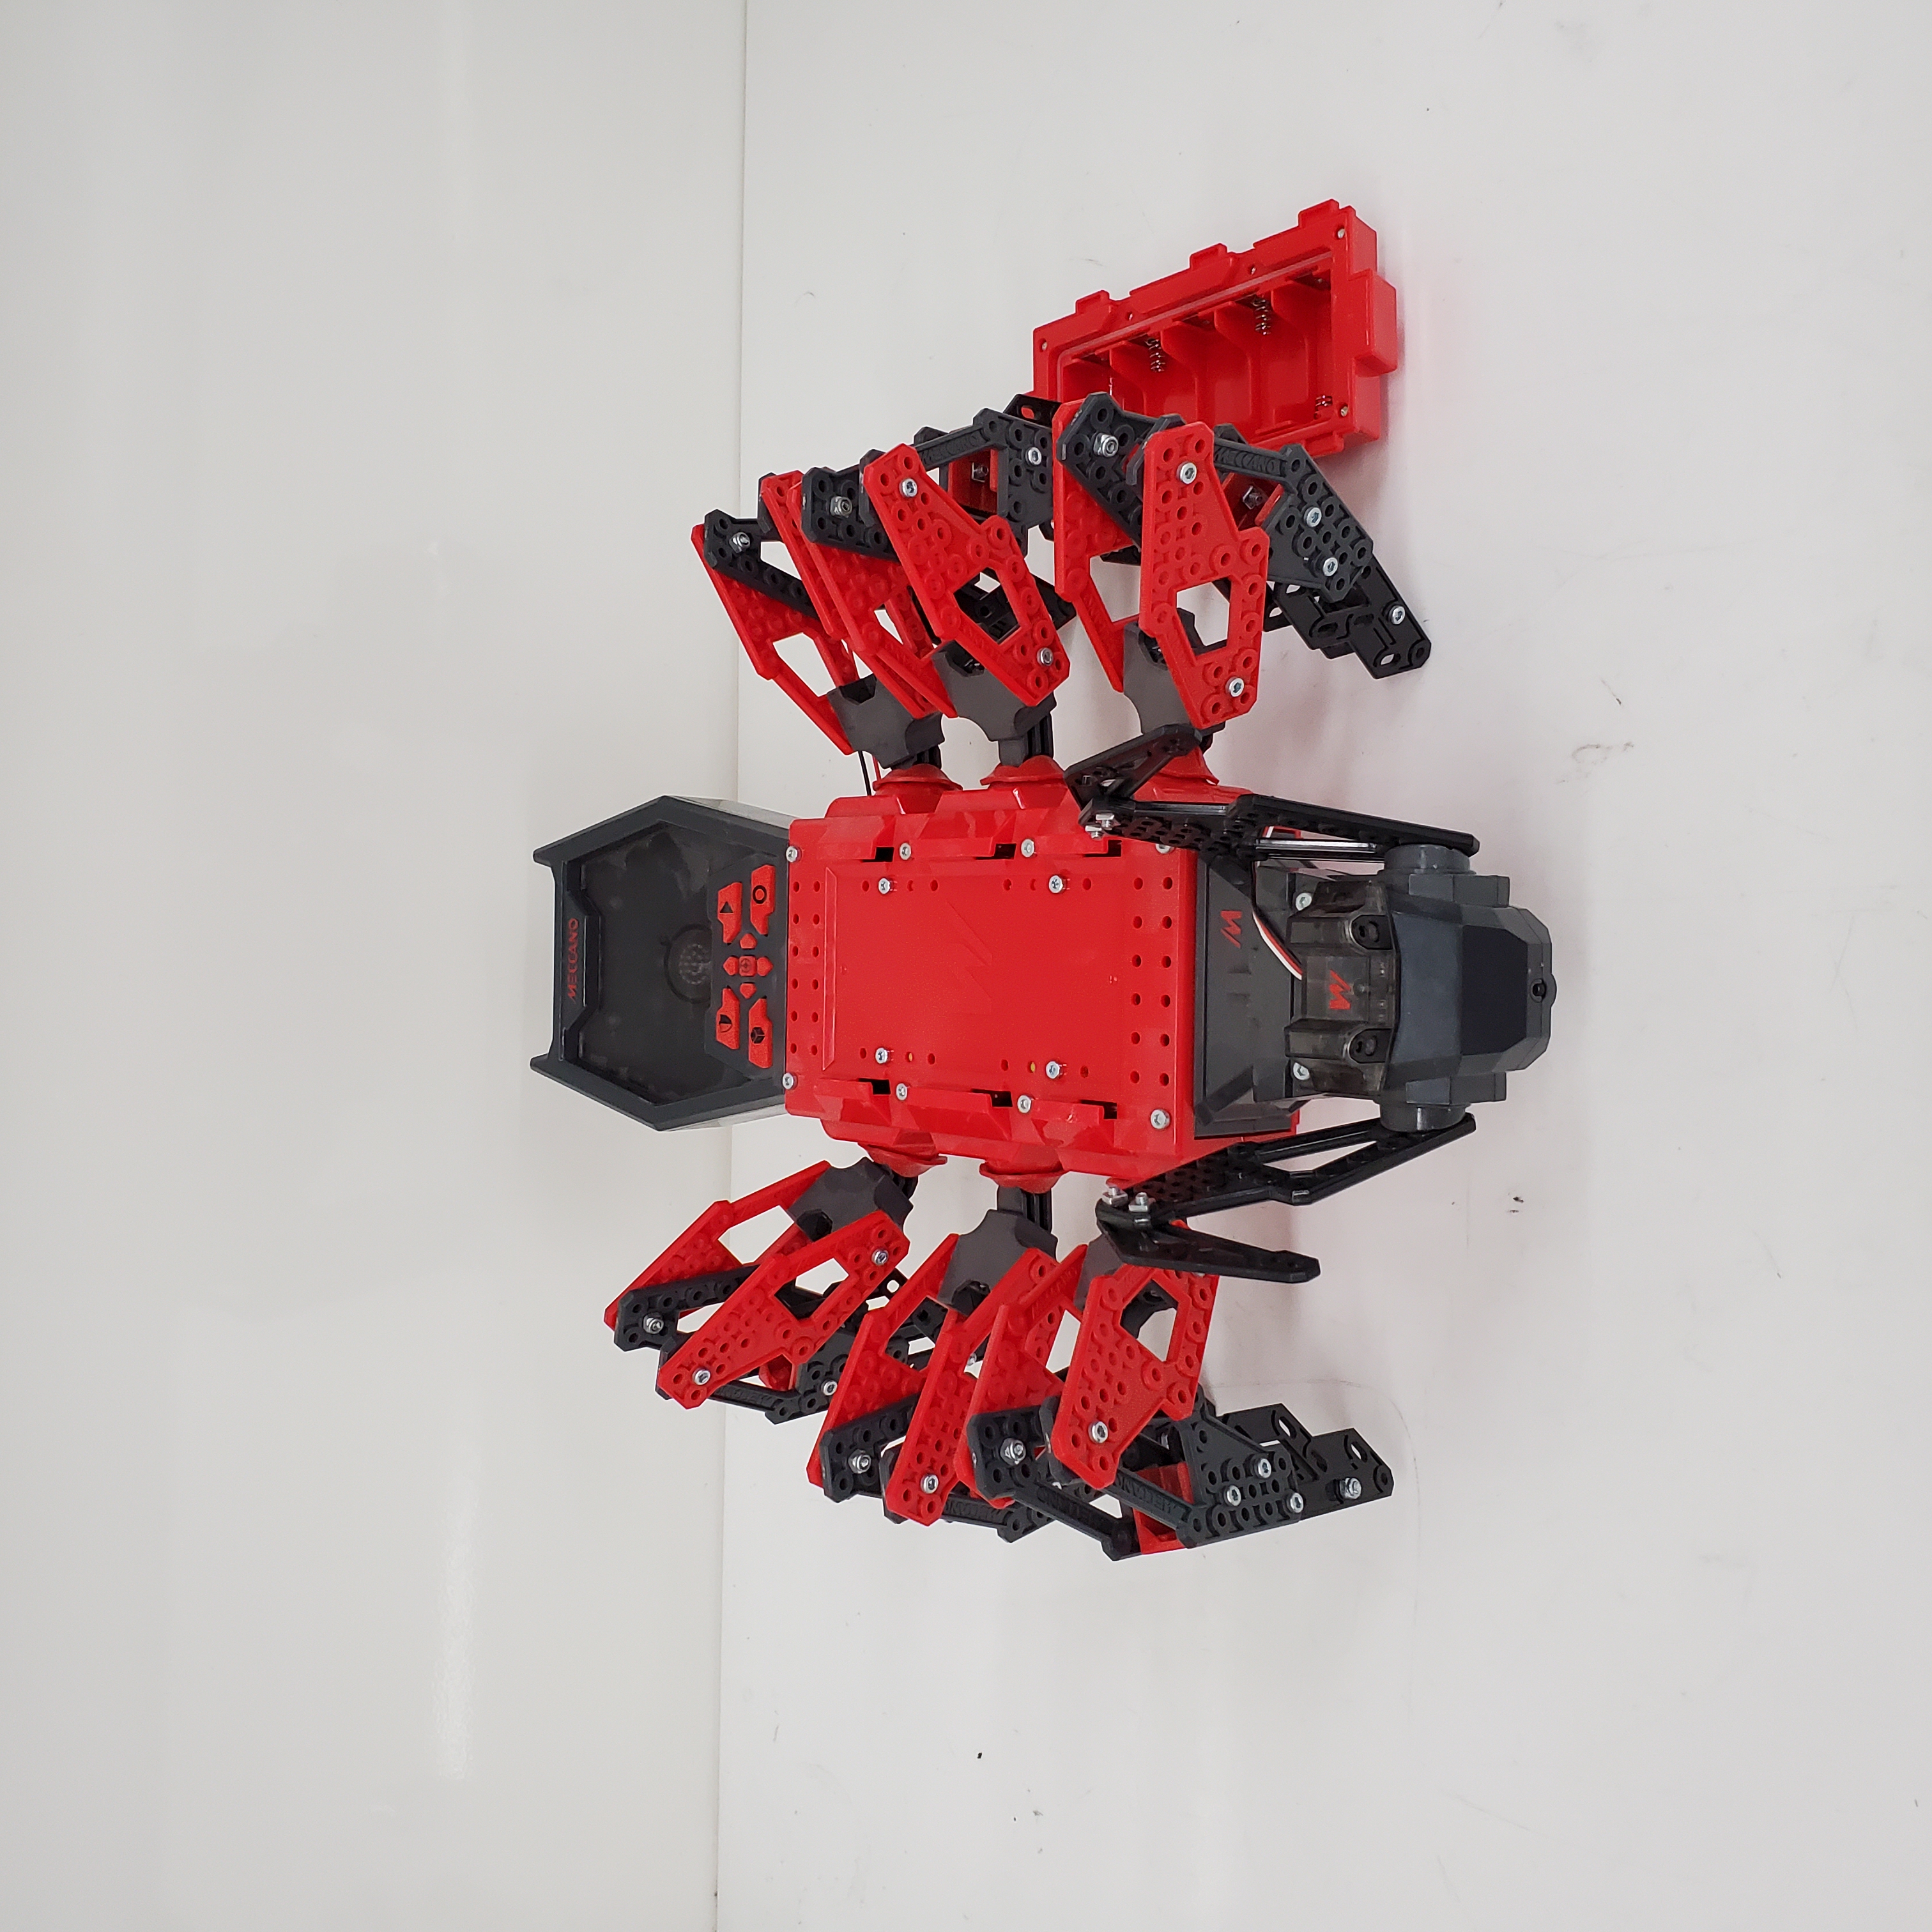 Buy the Meccano Robotic Mecca Spider STEM Robot Engineering-TESTED  POSITIVE: IT WORKS!!!!